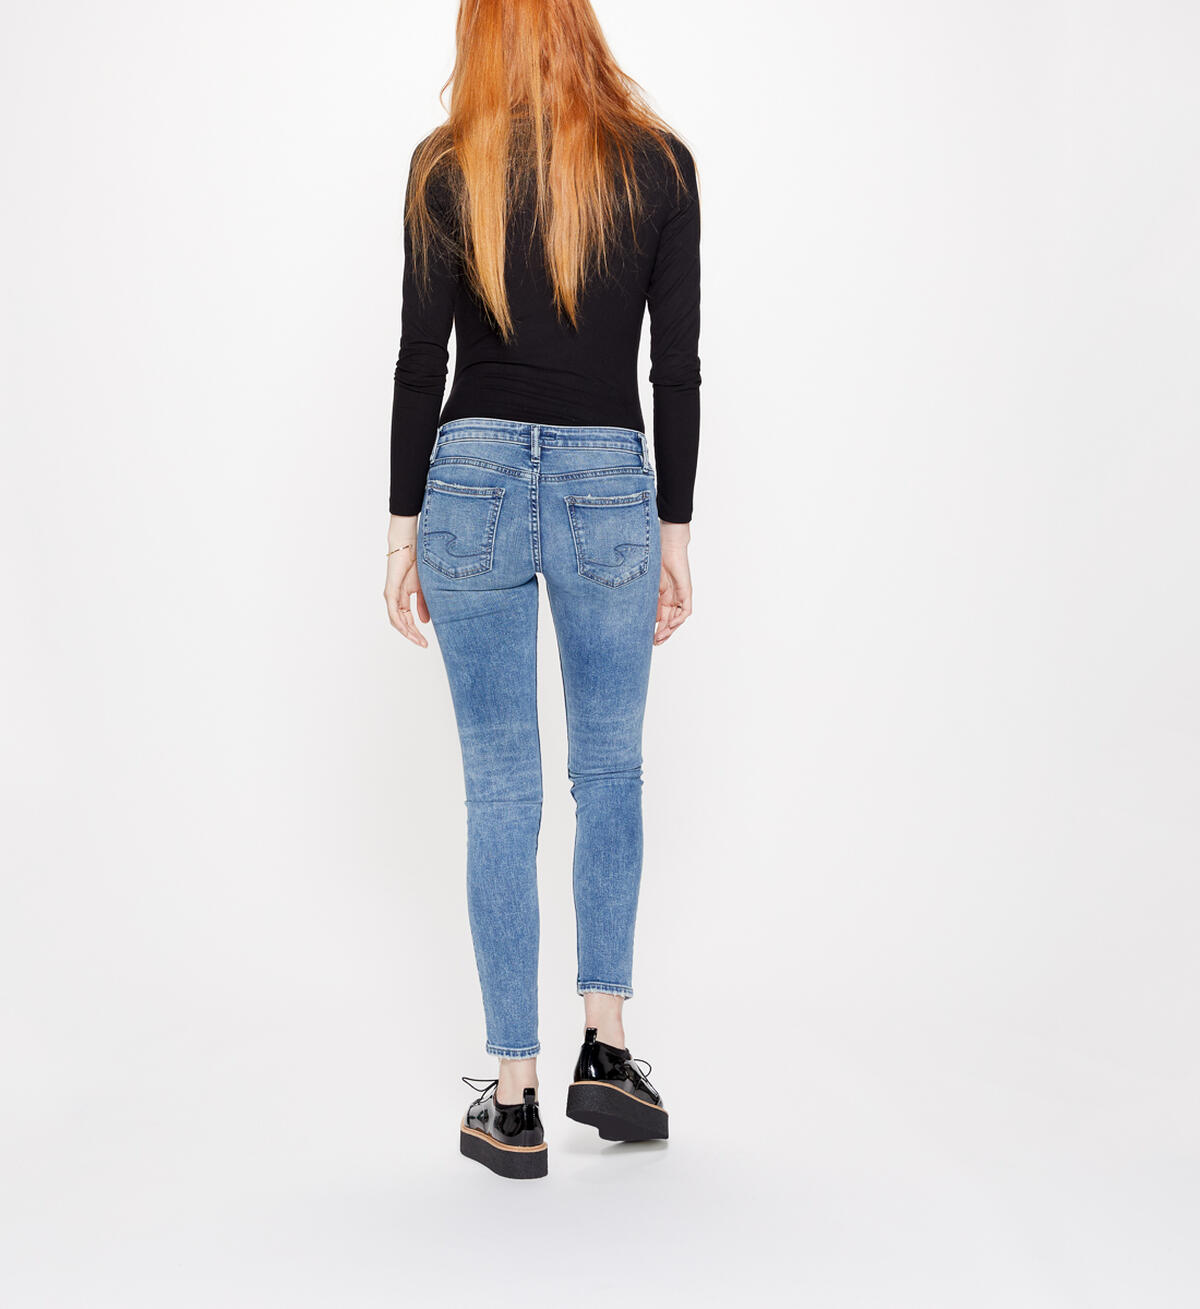 Tuesday Low Rise Skinny Leg Jeans Final Sale, , hi-res image number 1